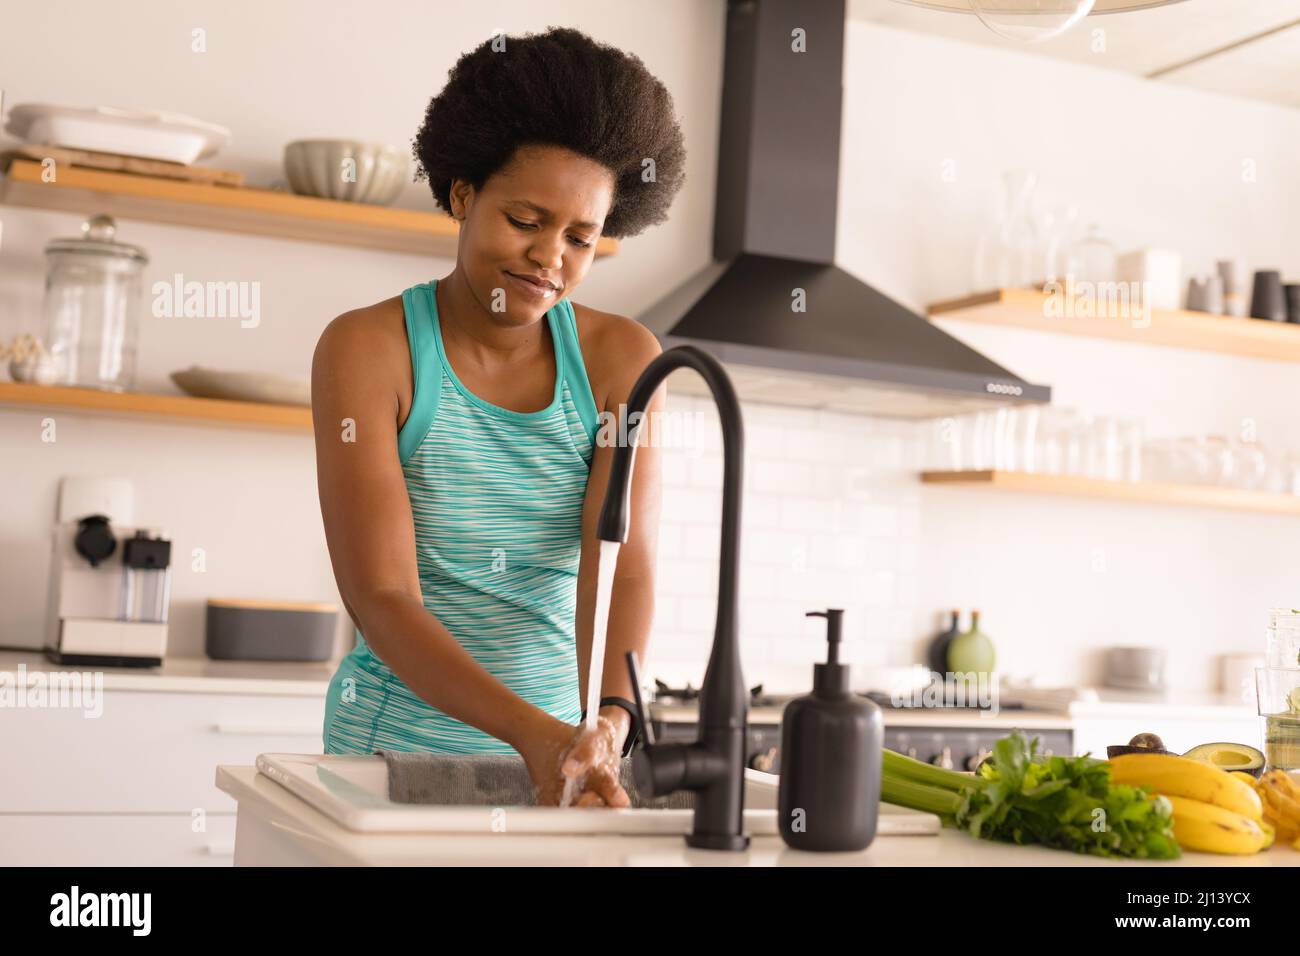 Mid adult african american woman washing hands while preparing food at home Stock Photo